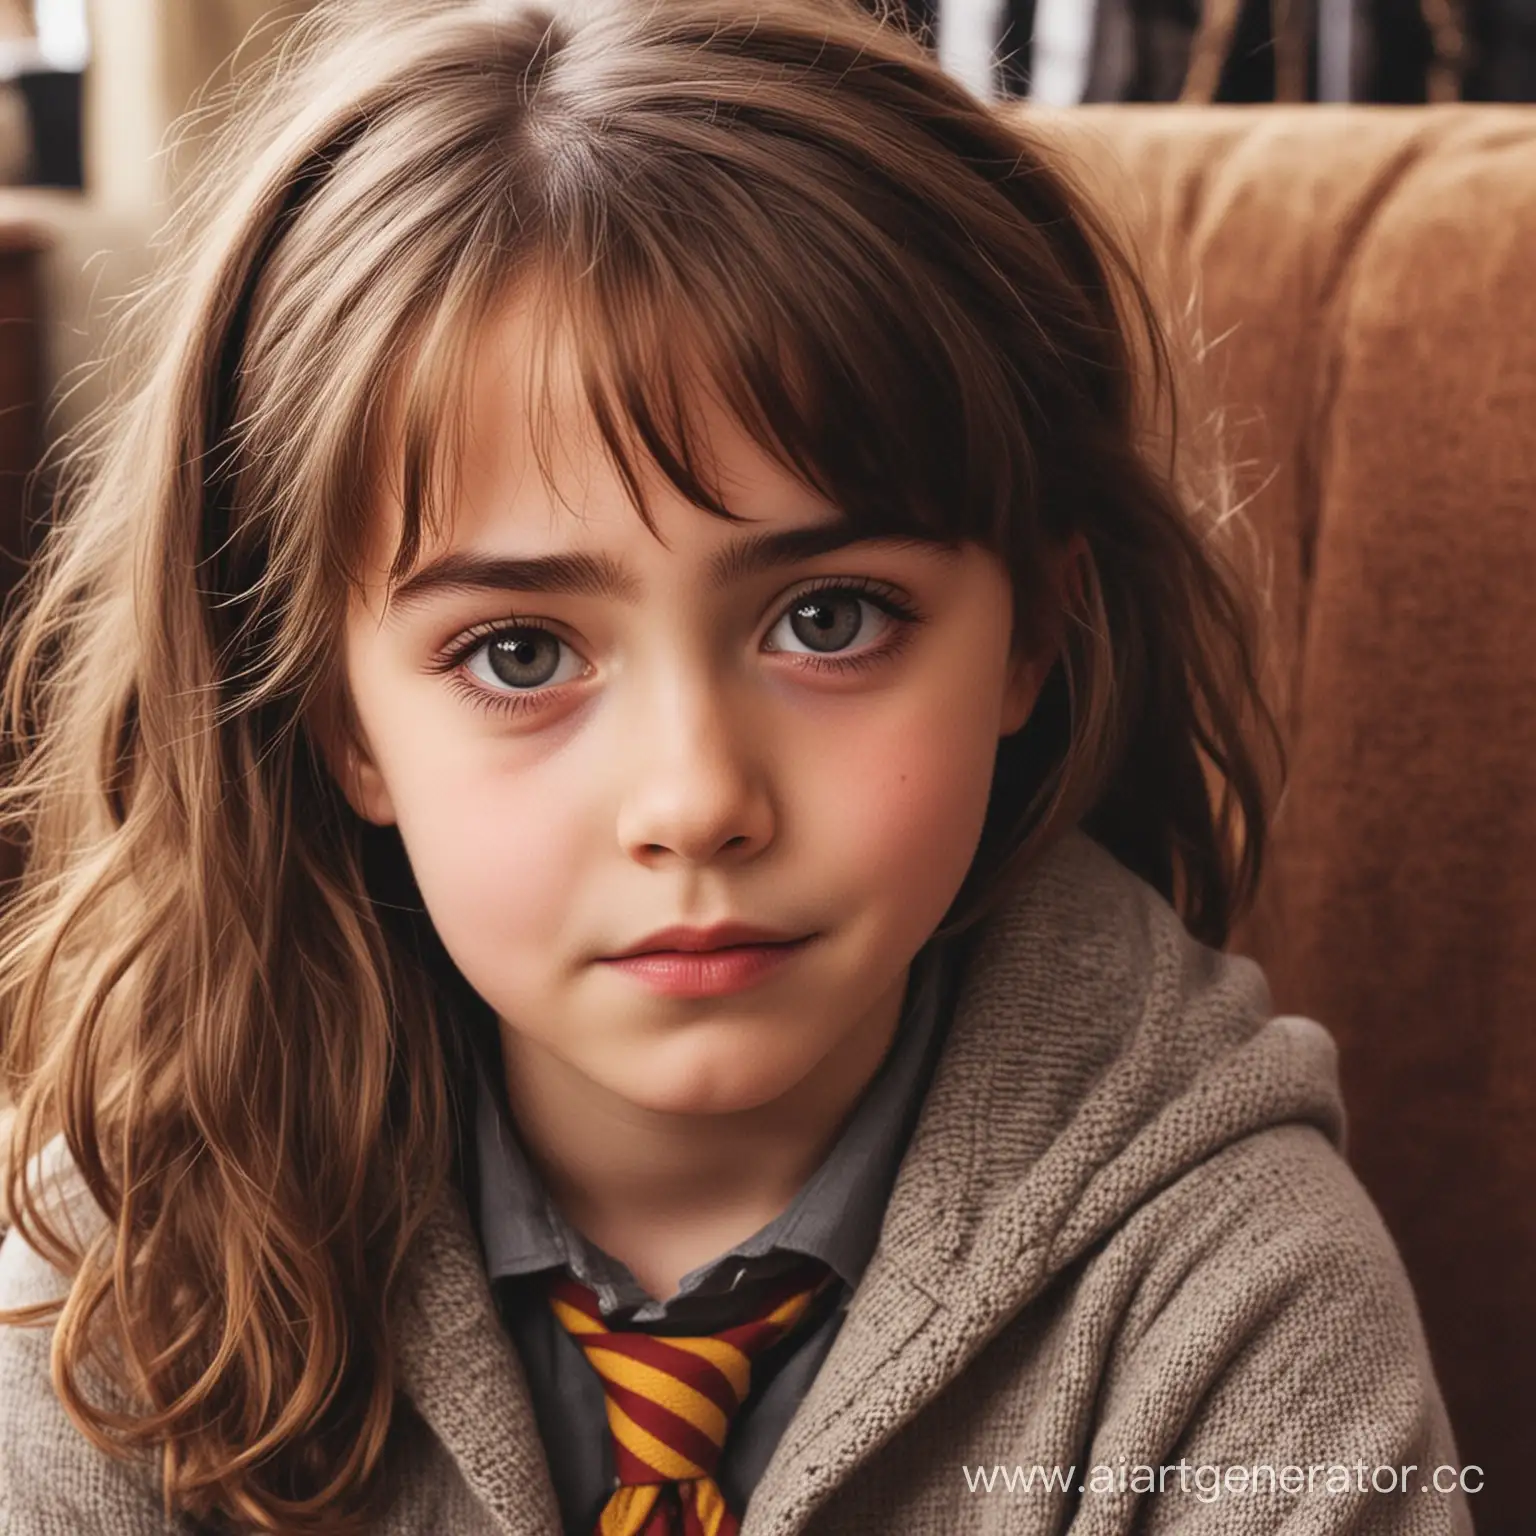 The child of Harry Potter and Hermione Granger